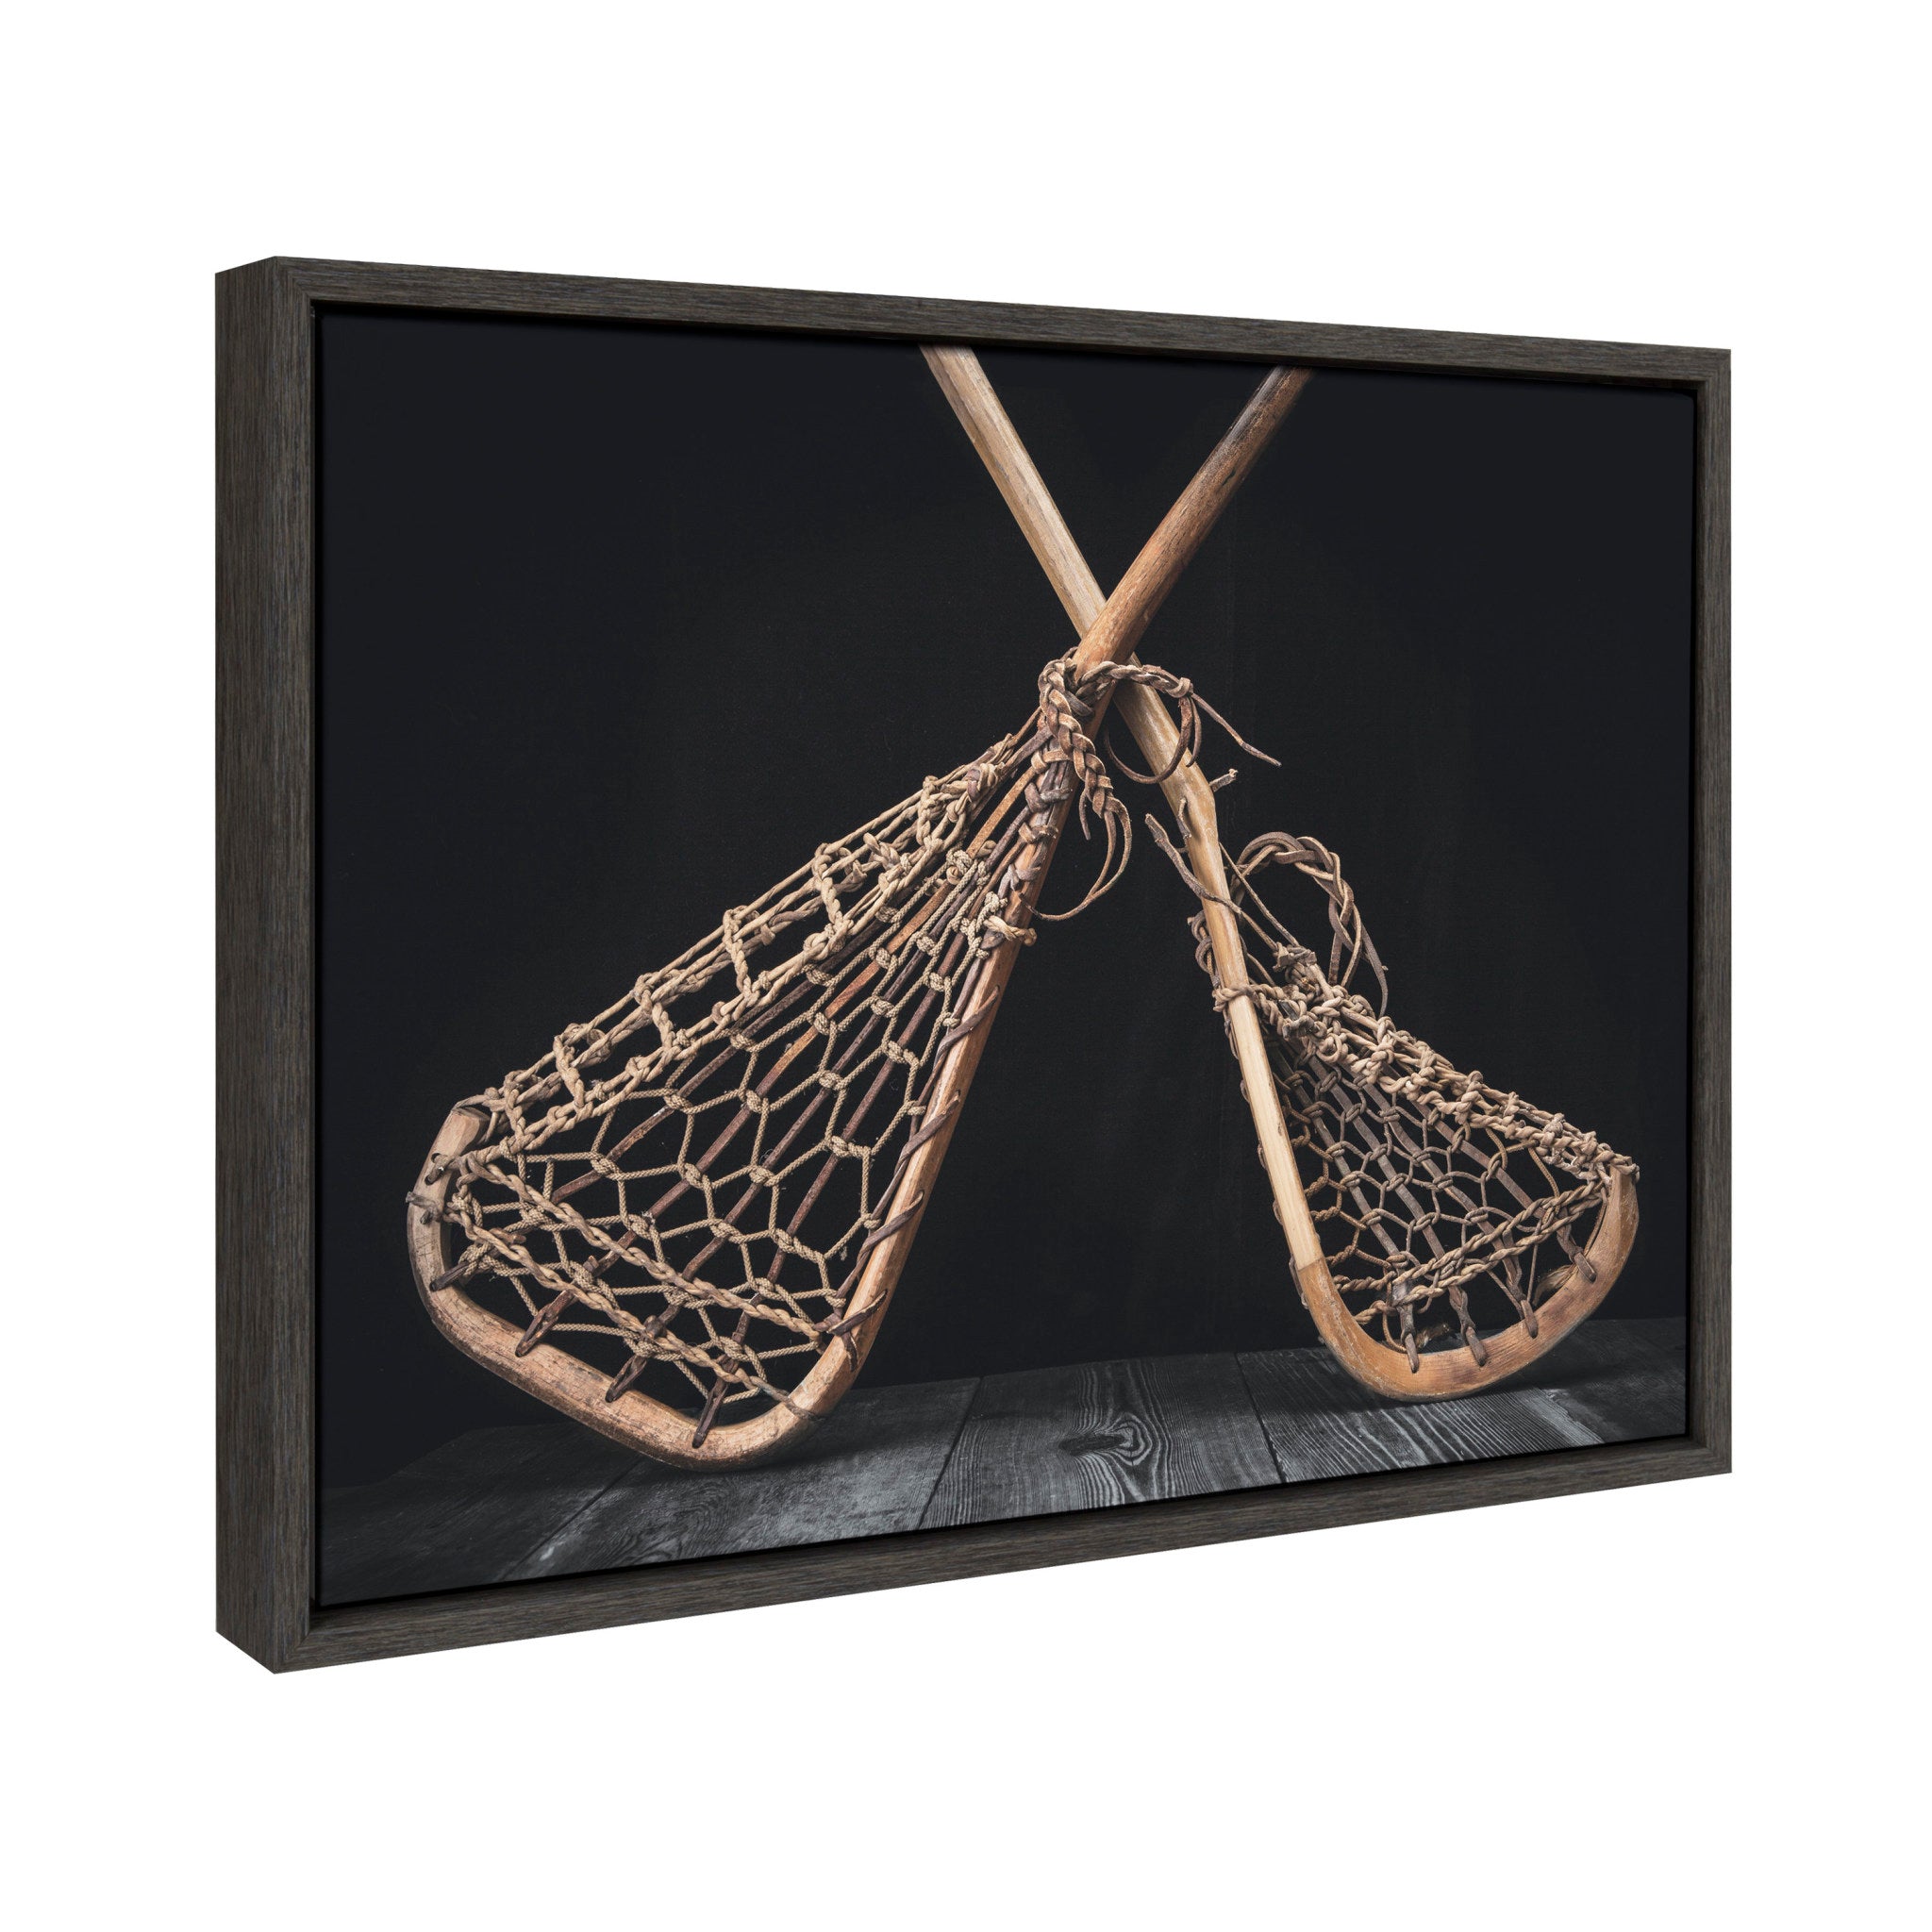 Sylvie Lacrosse Sticks Framed Canvas by Shawn St. Peter